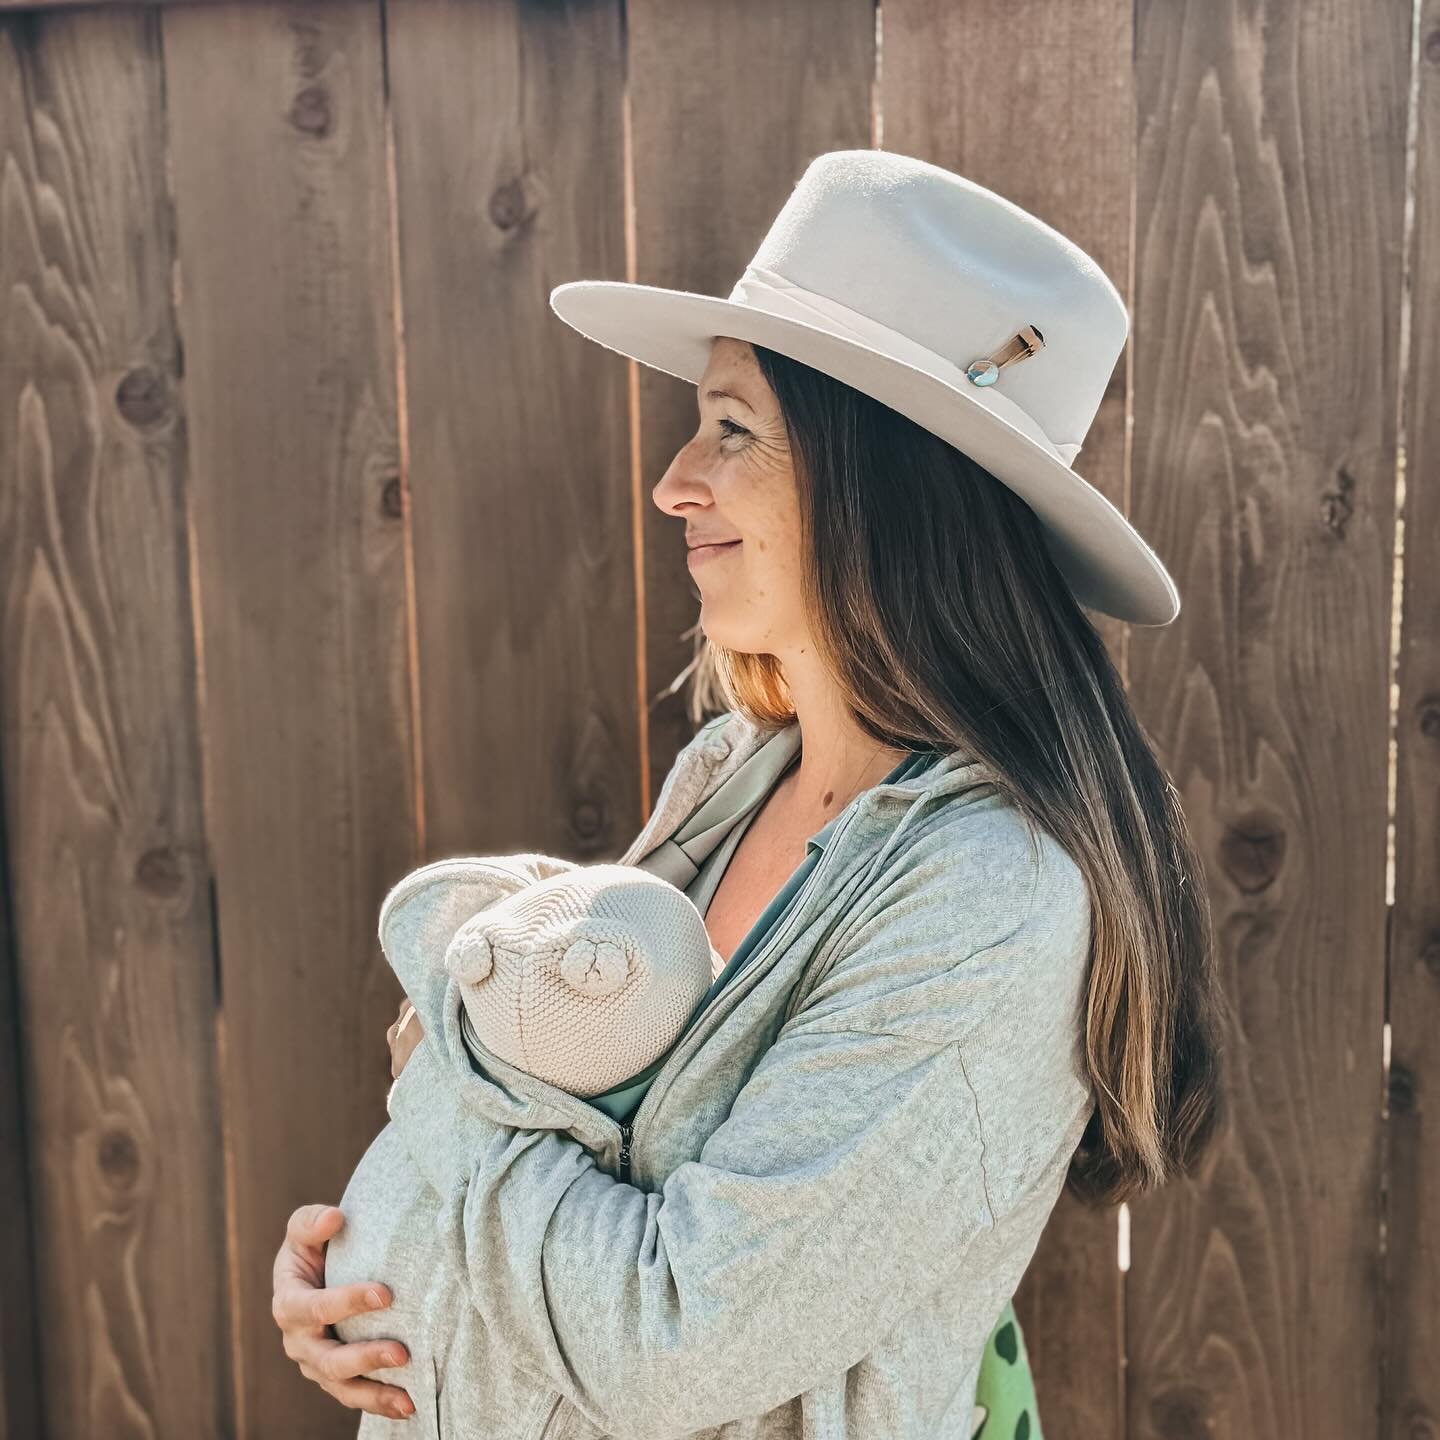 Beautiful Susannah making momming look even more glamorous in her new @Brimroad hat - a simple, elegant style and peep our unique hat pins made by a local California artist! We are obsessed @zanmcgann #Brimroad #handmadehats #hatmakers